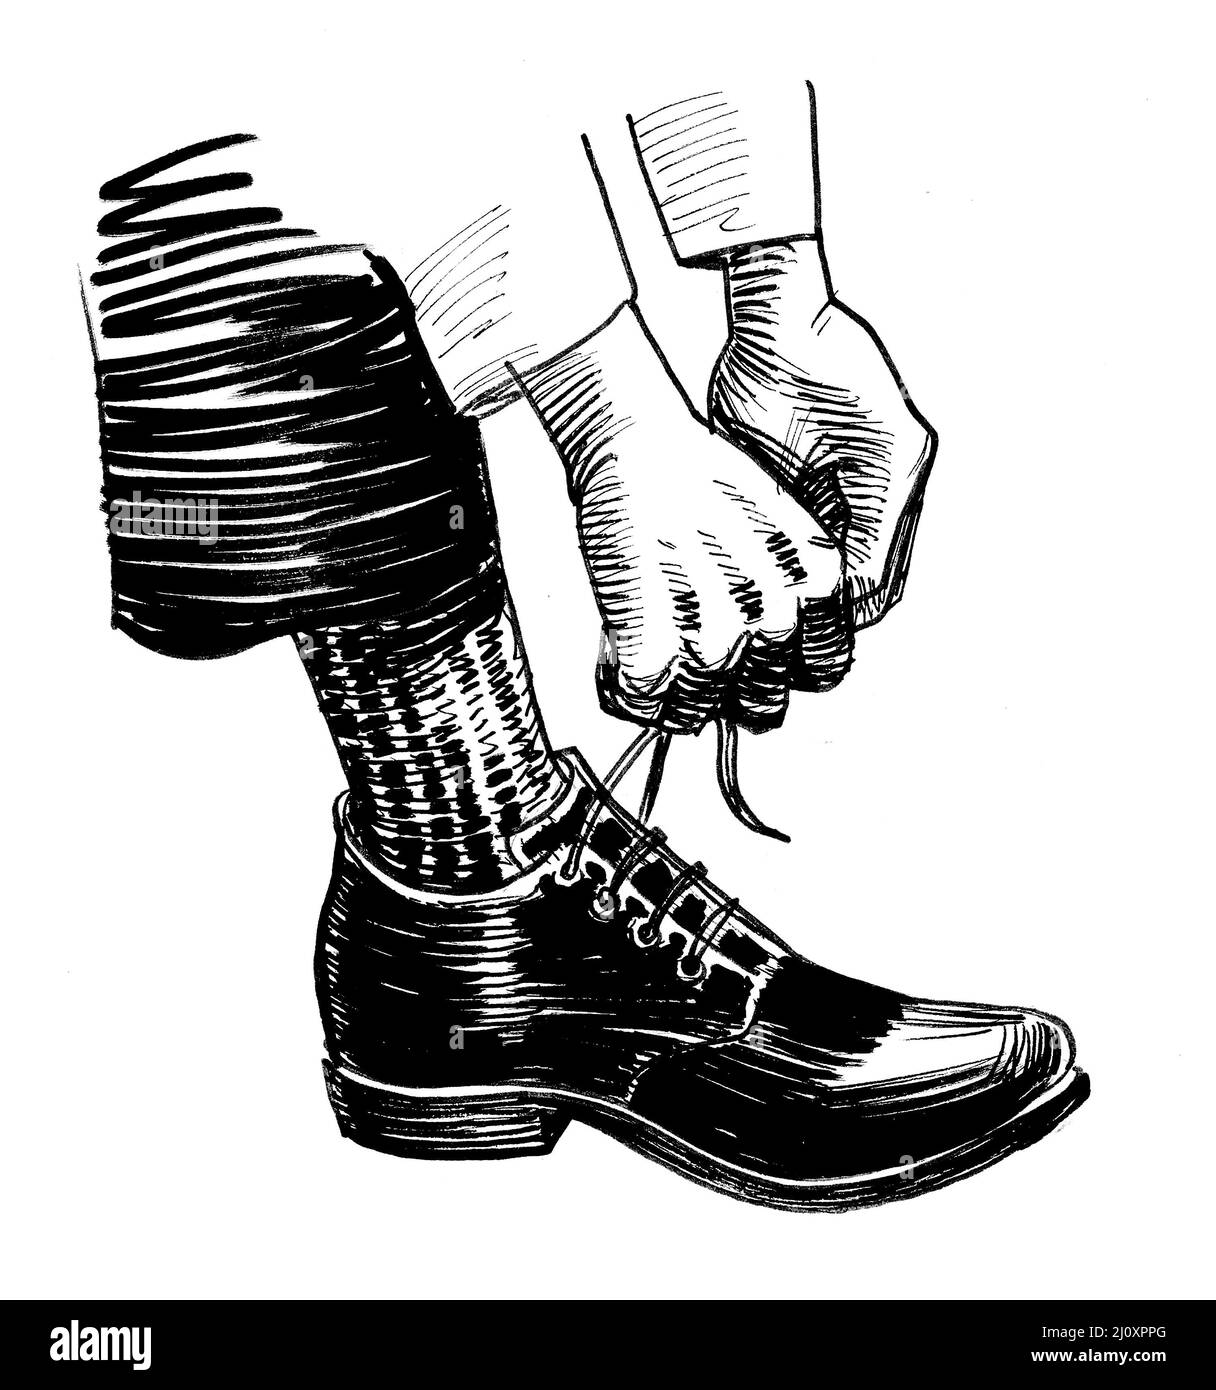 Hands tying laces on shoe. Ink black and white drawing Stock Photo - Alamy